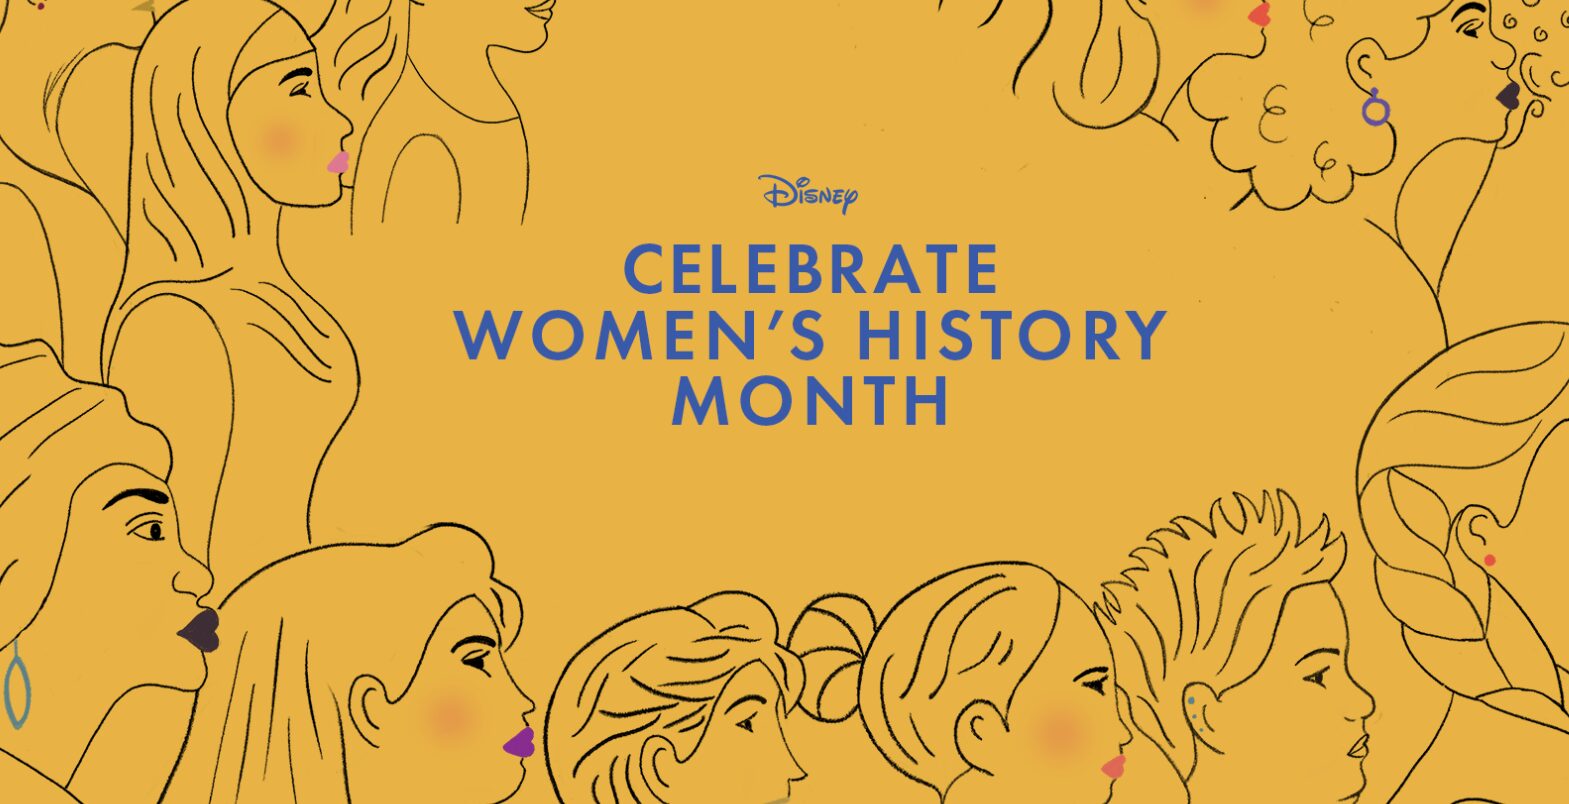 Life at Disney Celebrates Women's History Month - Power and Persistence